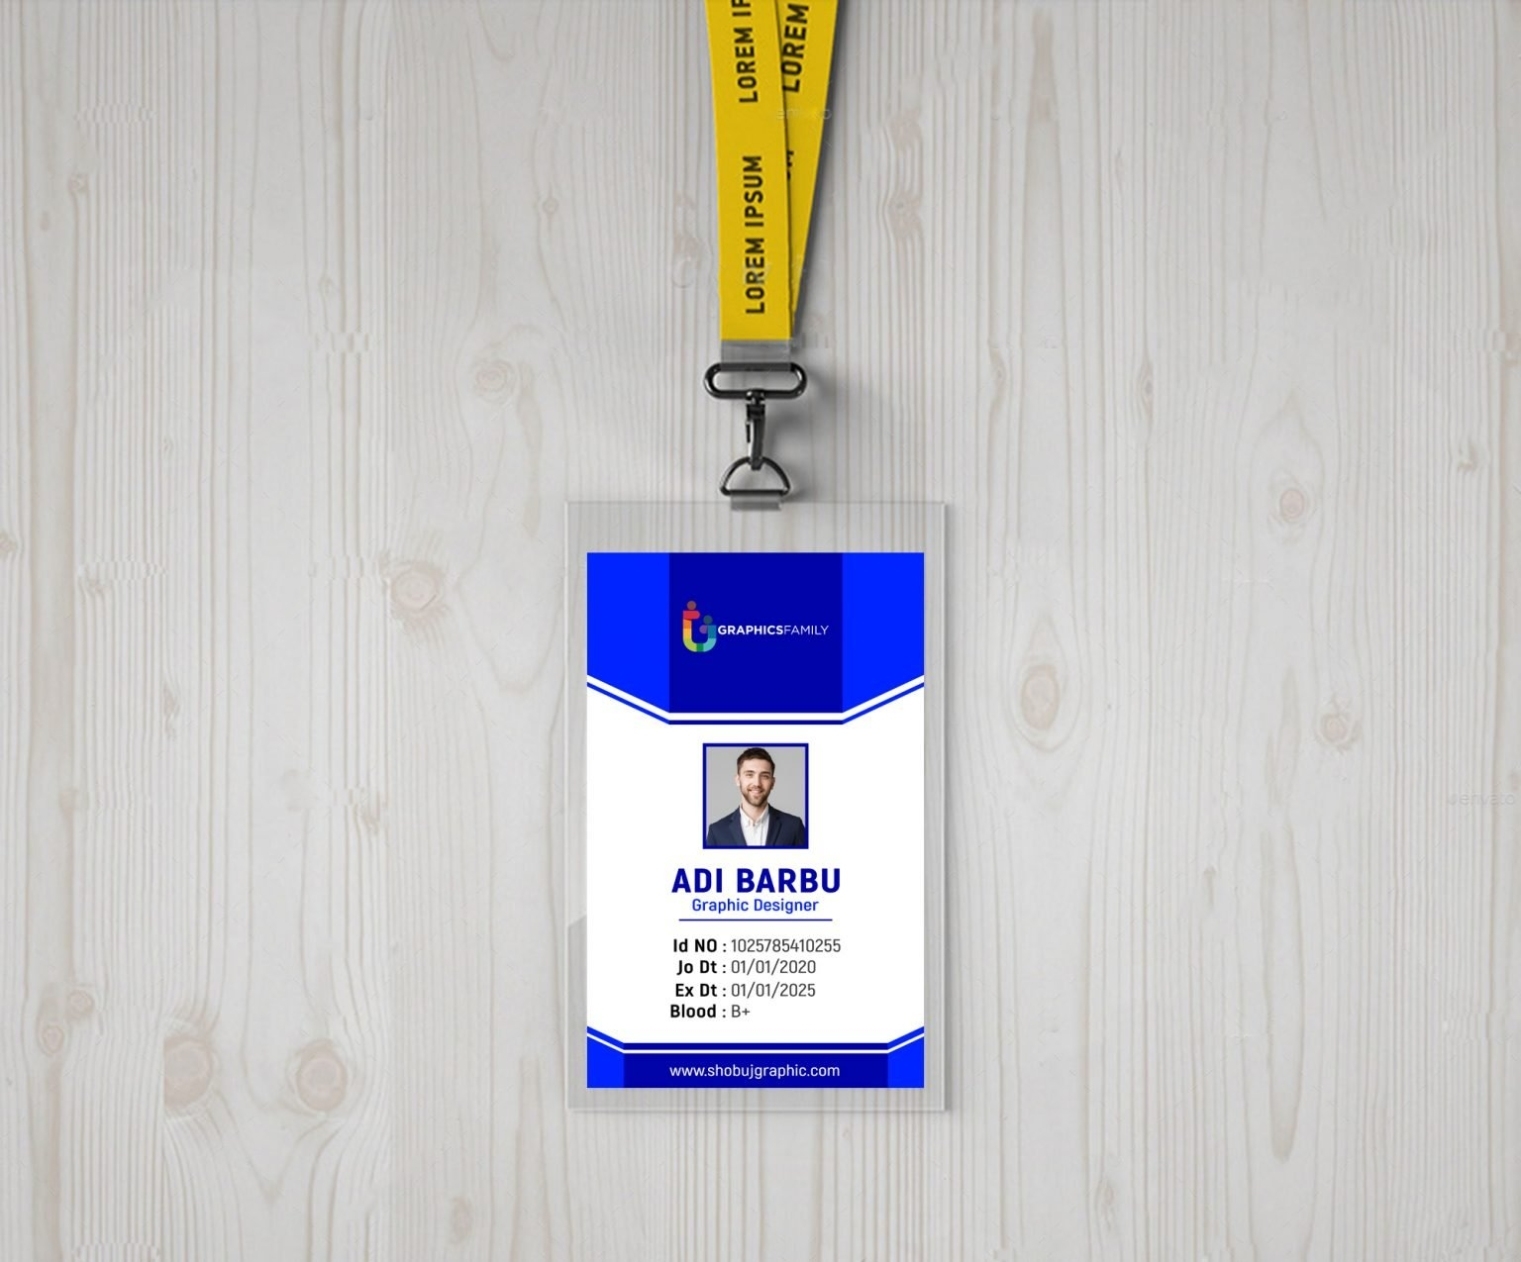 Flat Office Id Card Design Template Free Psd - Graphicsfamily Pertaining To Id Card Design Template Psd Free Download